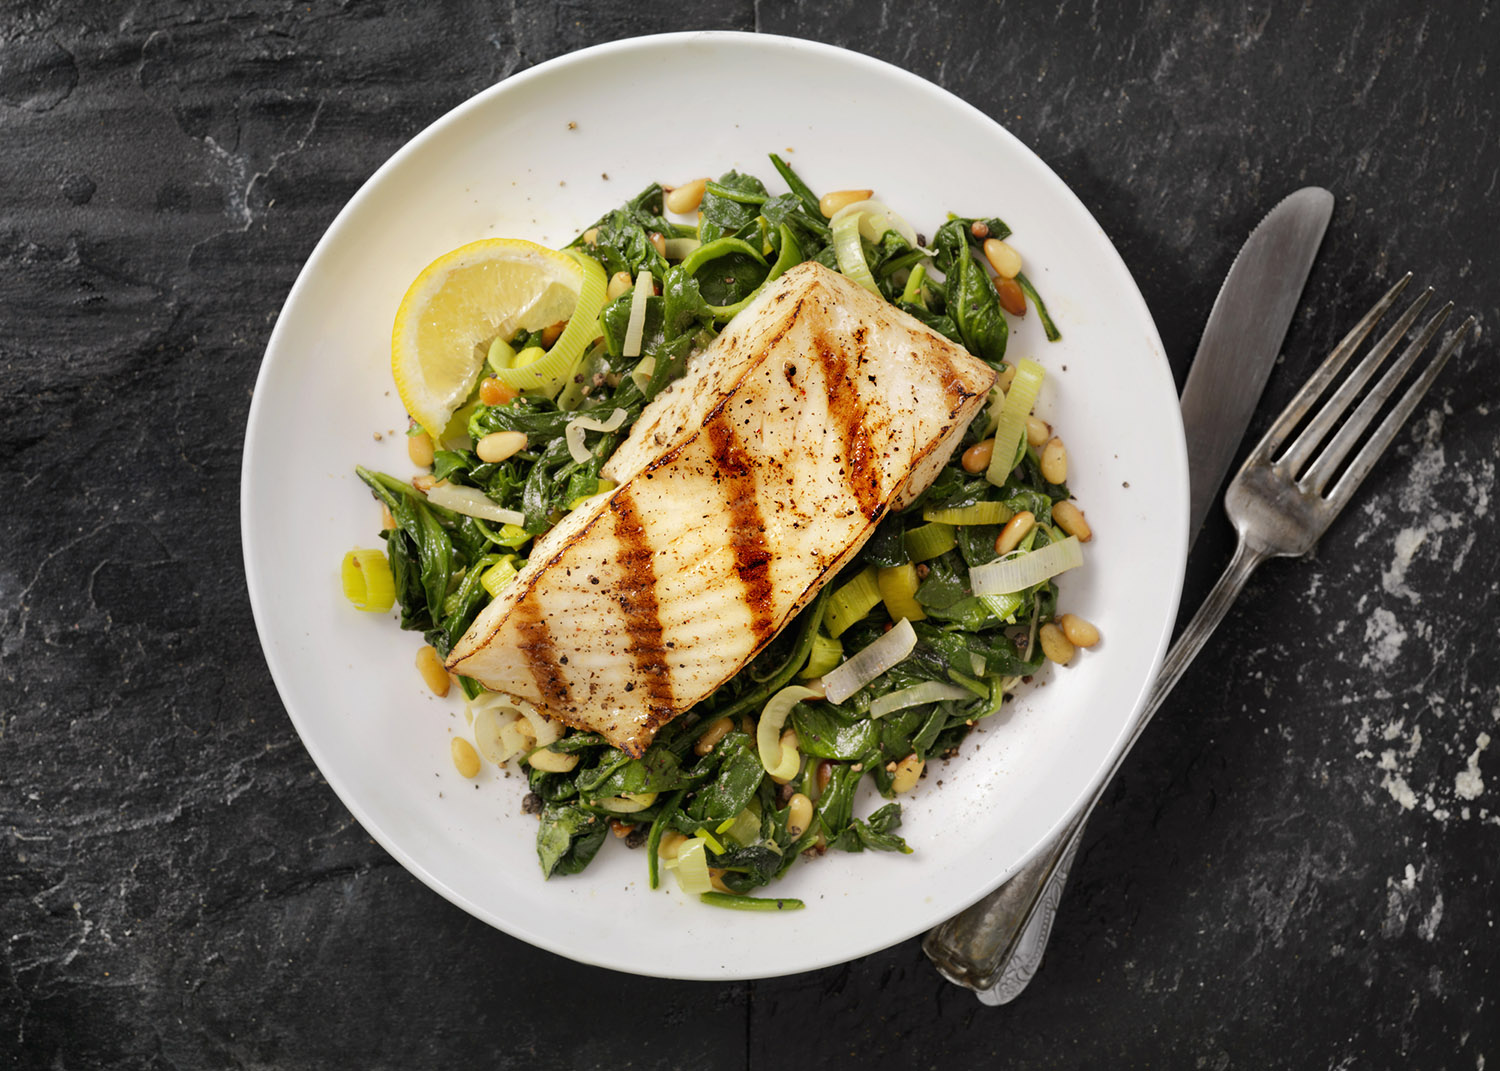 Grilled Halibut with Spinach, leeks and Pine Nuts - Photographed on Hasselblad H3D2-39mb Camera